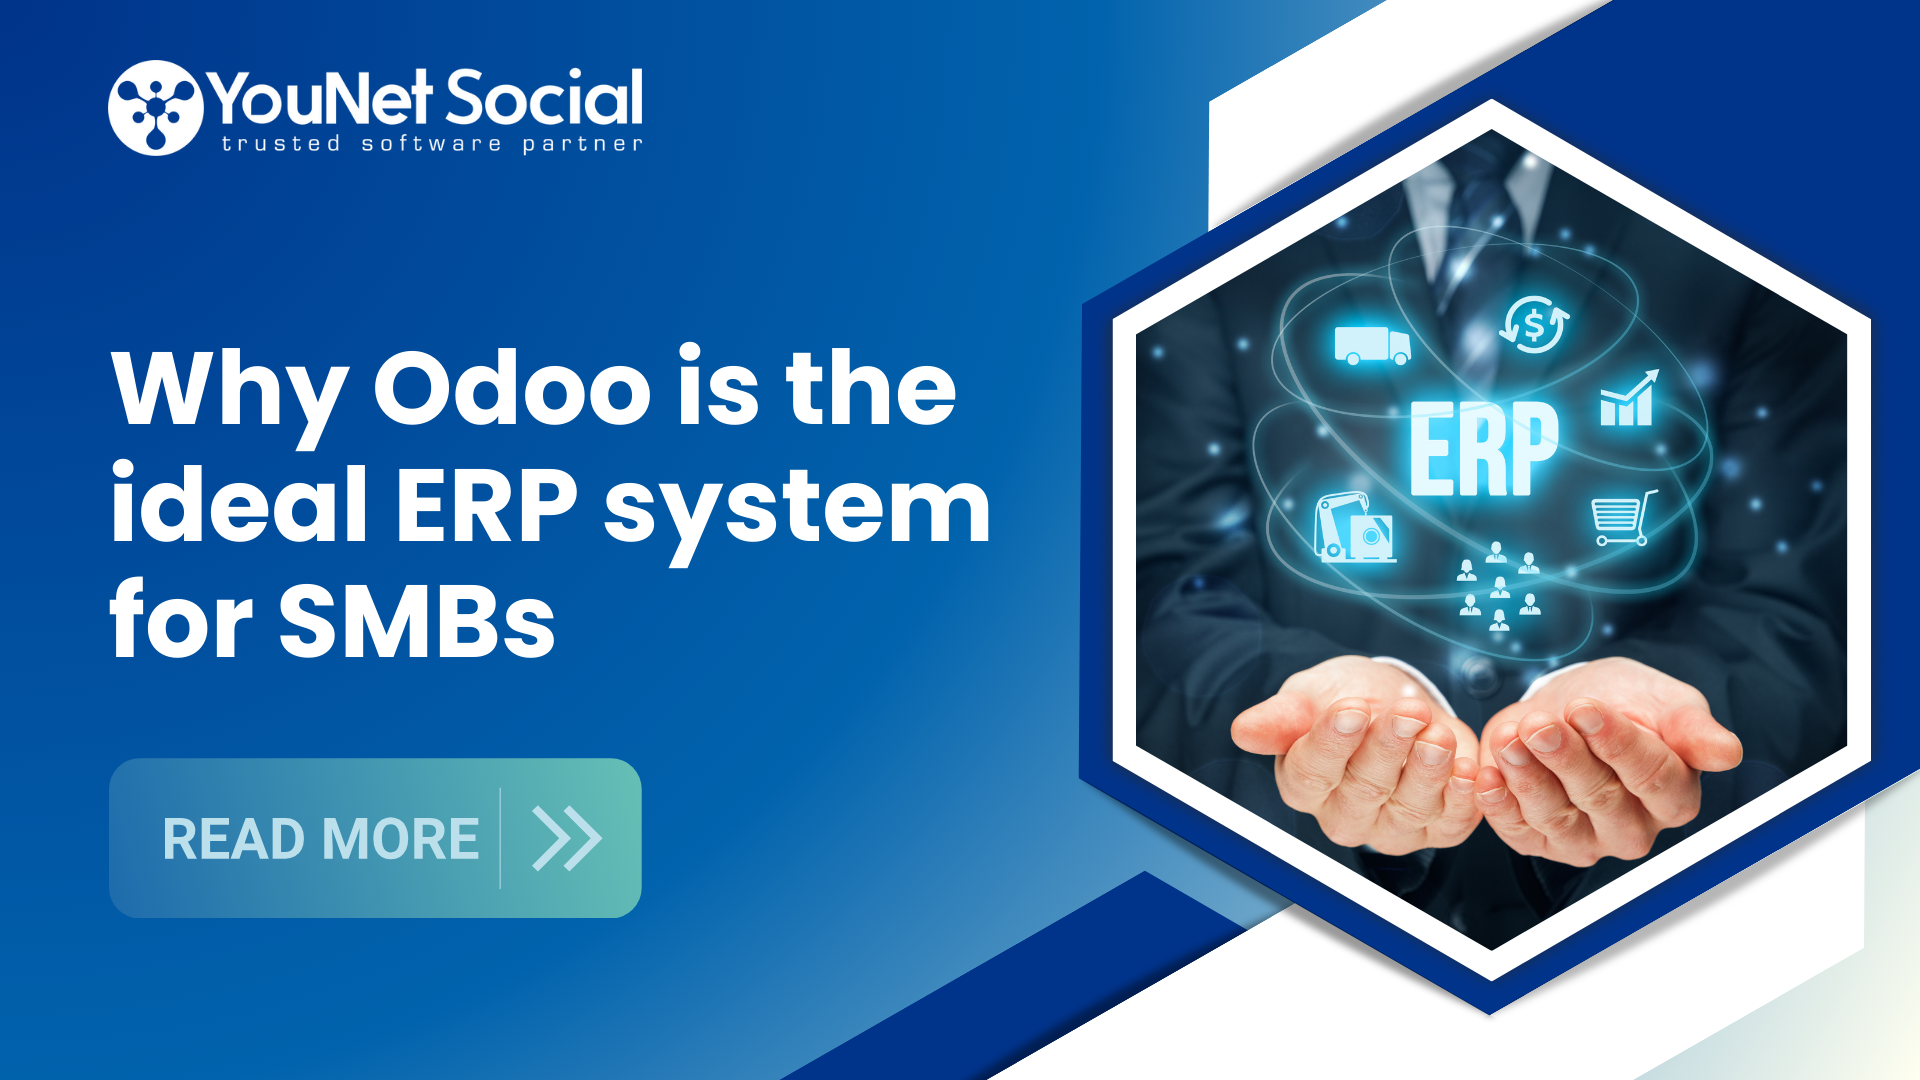 Why Odoo is the Ideal ERP System for SMBs?